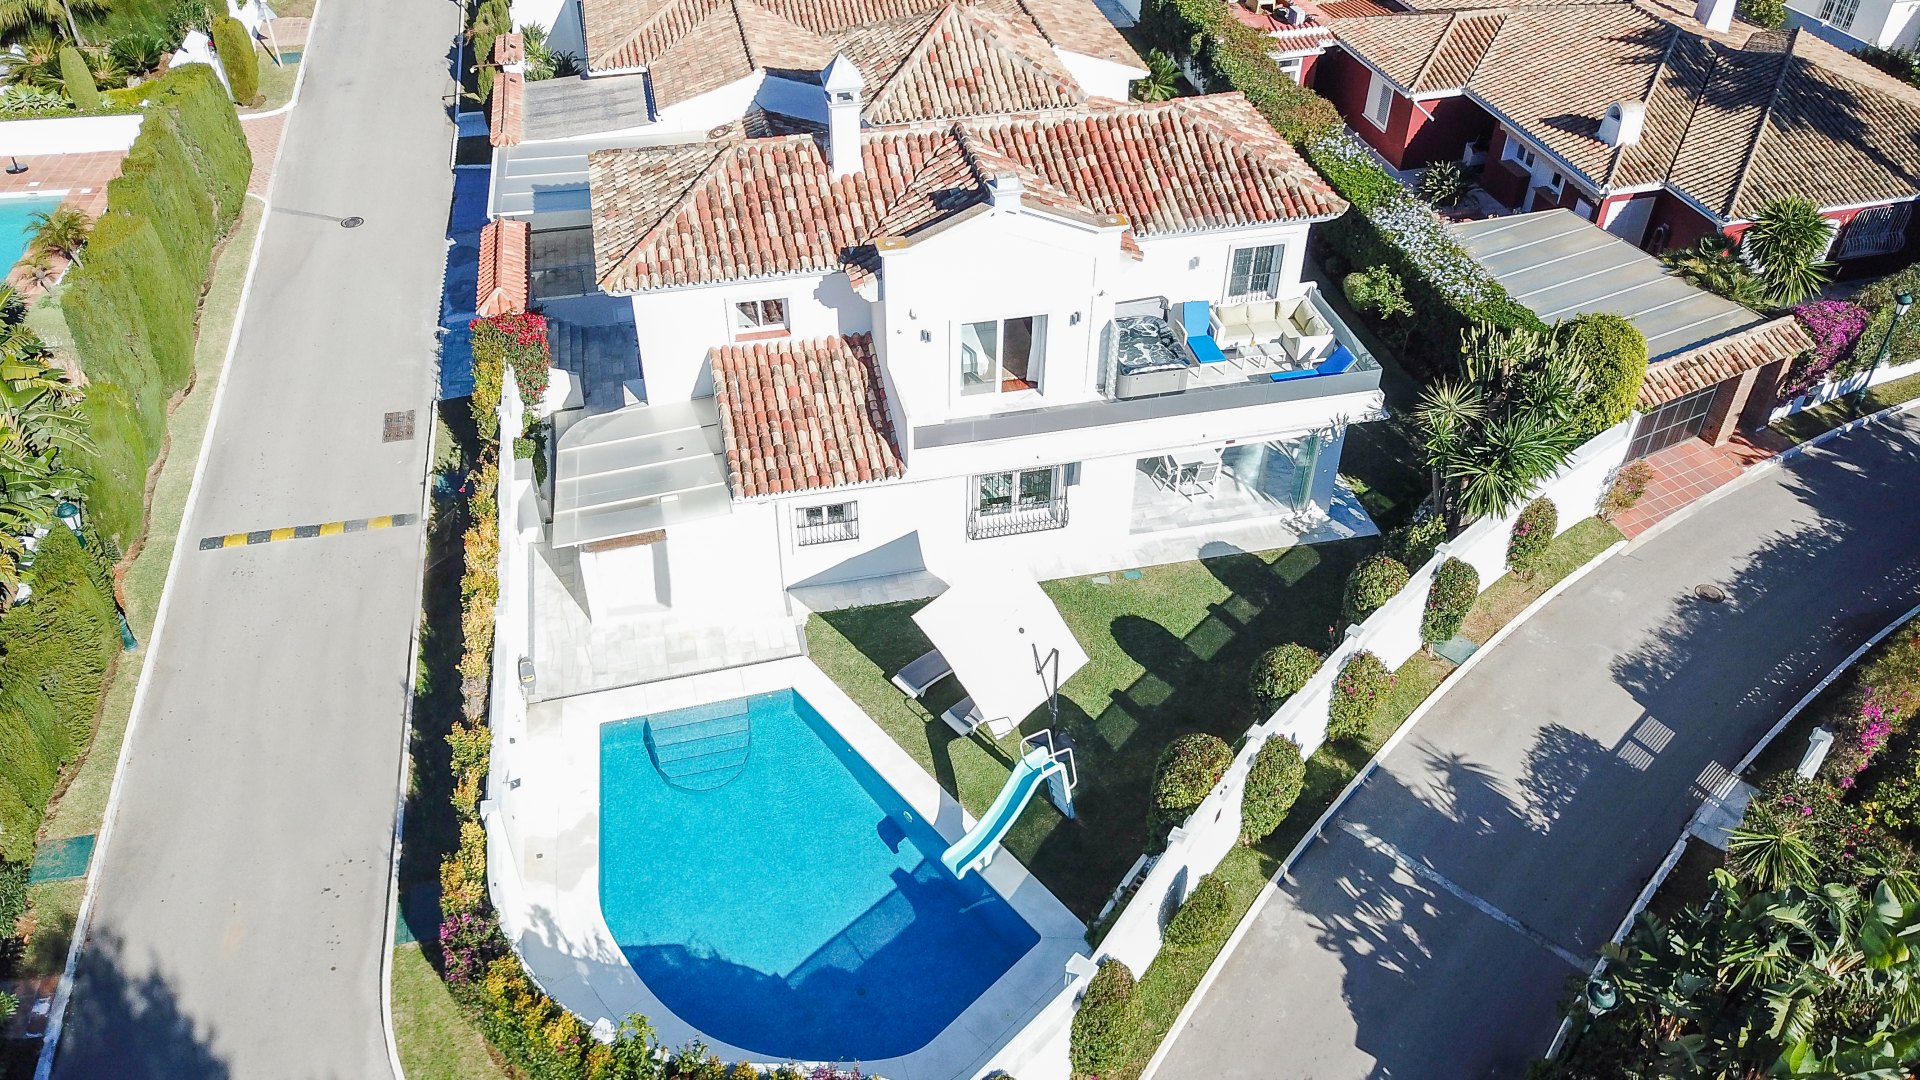 Villa for sale in Los Monteros de Marbella, with private pool with slide, jacuzzi and next to the beach.